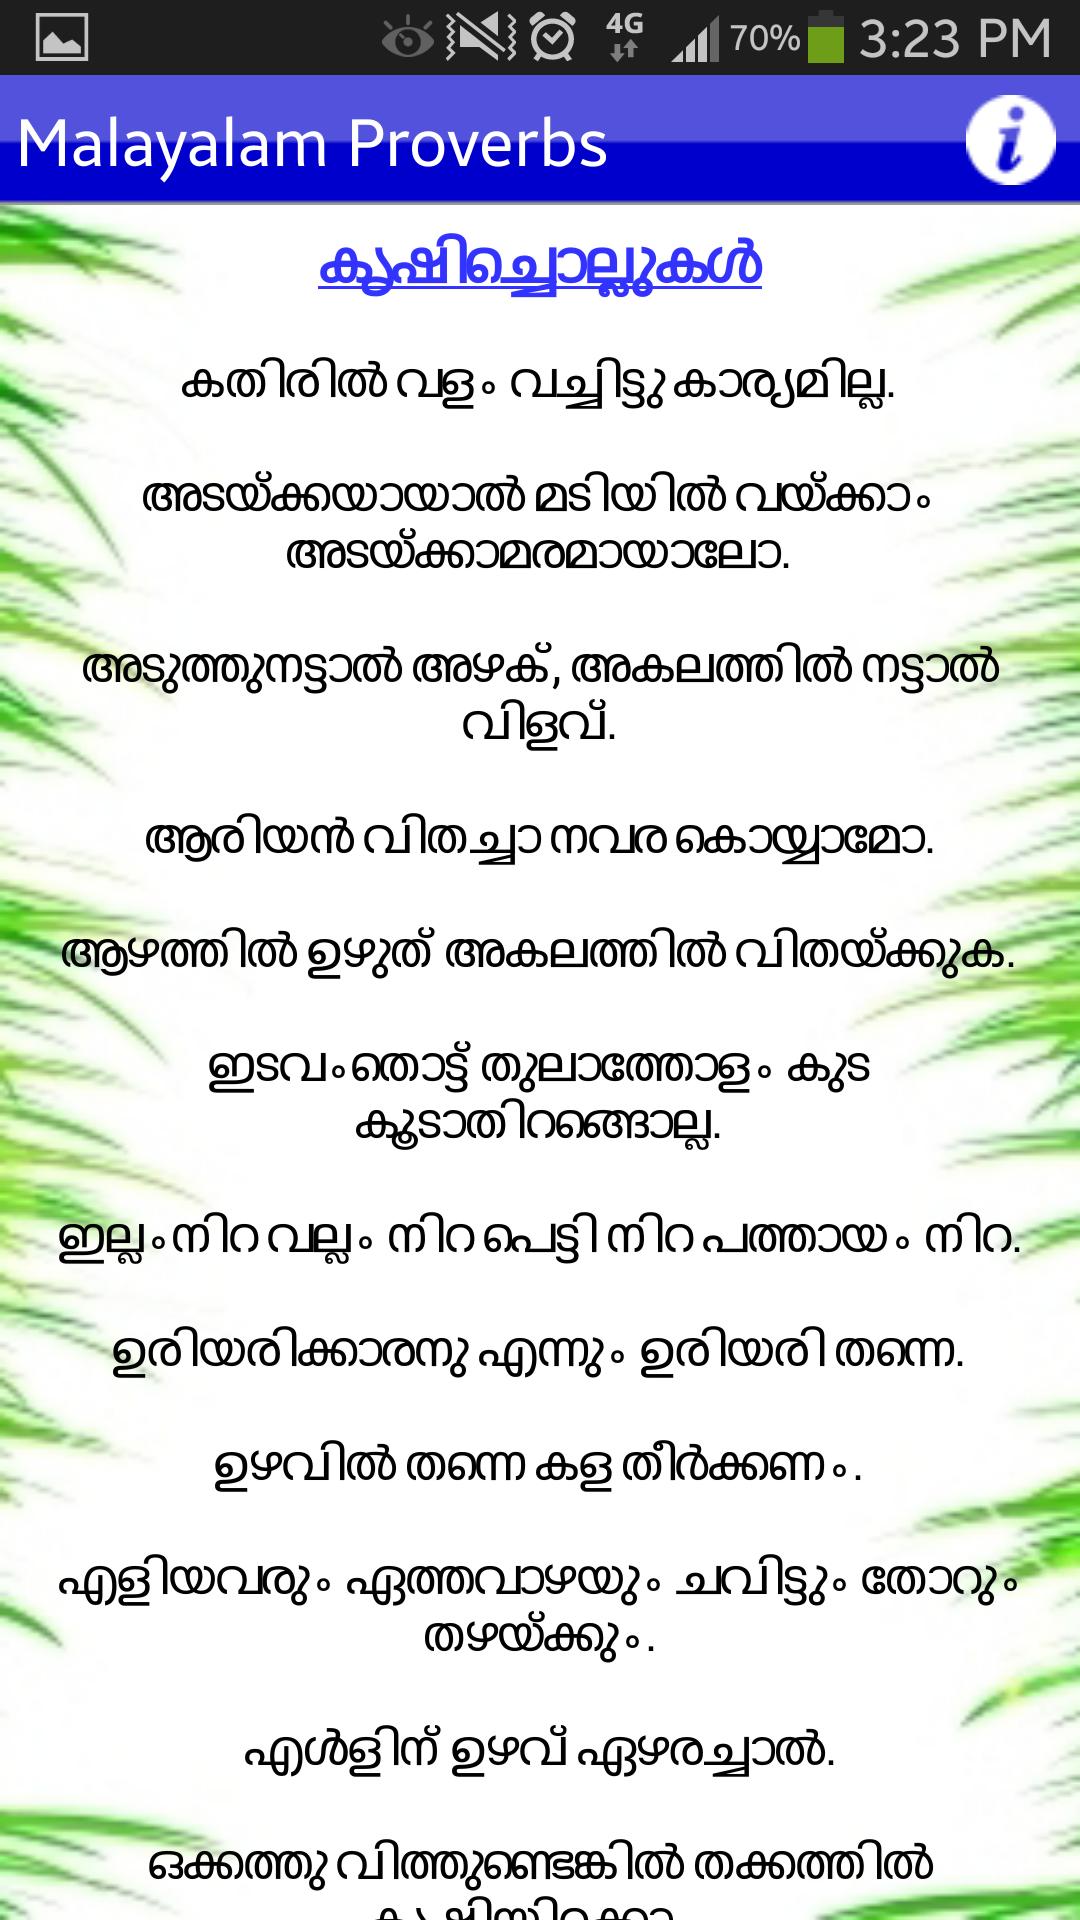 Pazhamchollukal Malayalam for Android - APK Download